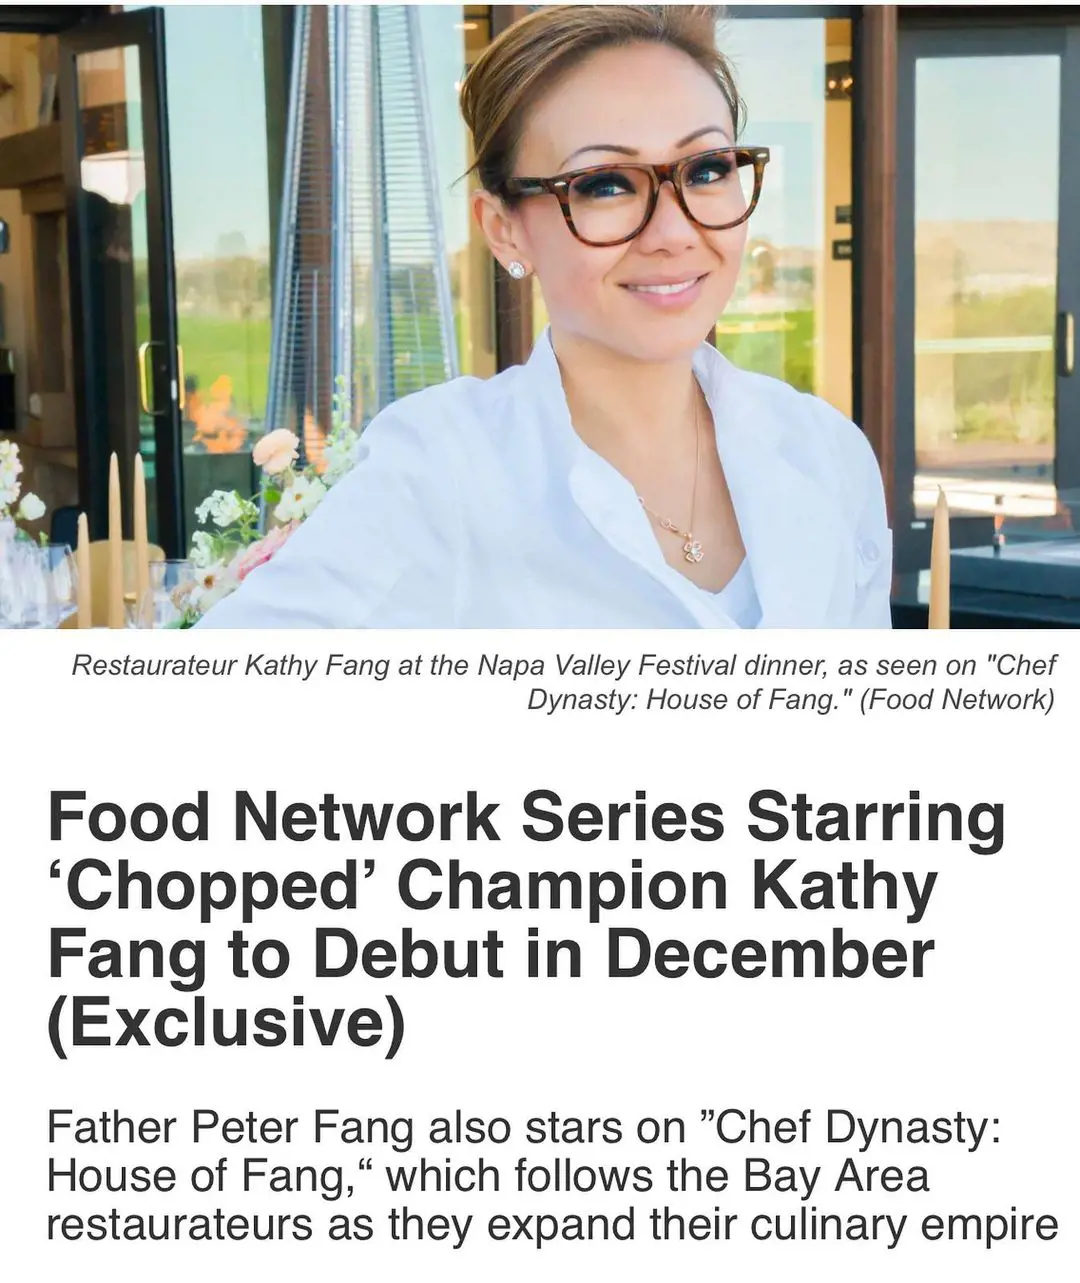 Kathy starred in the Food network's series called Chopped